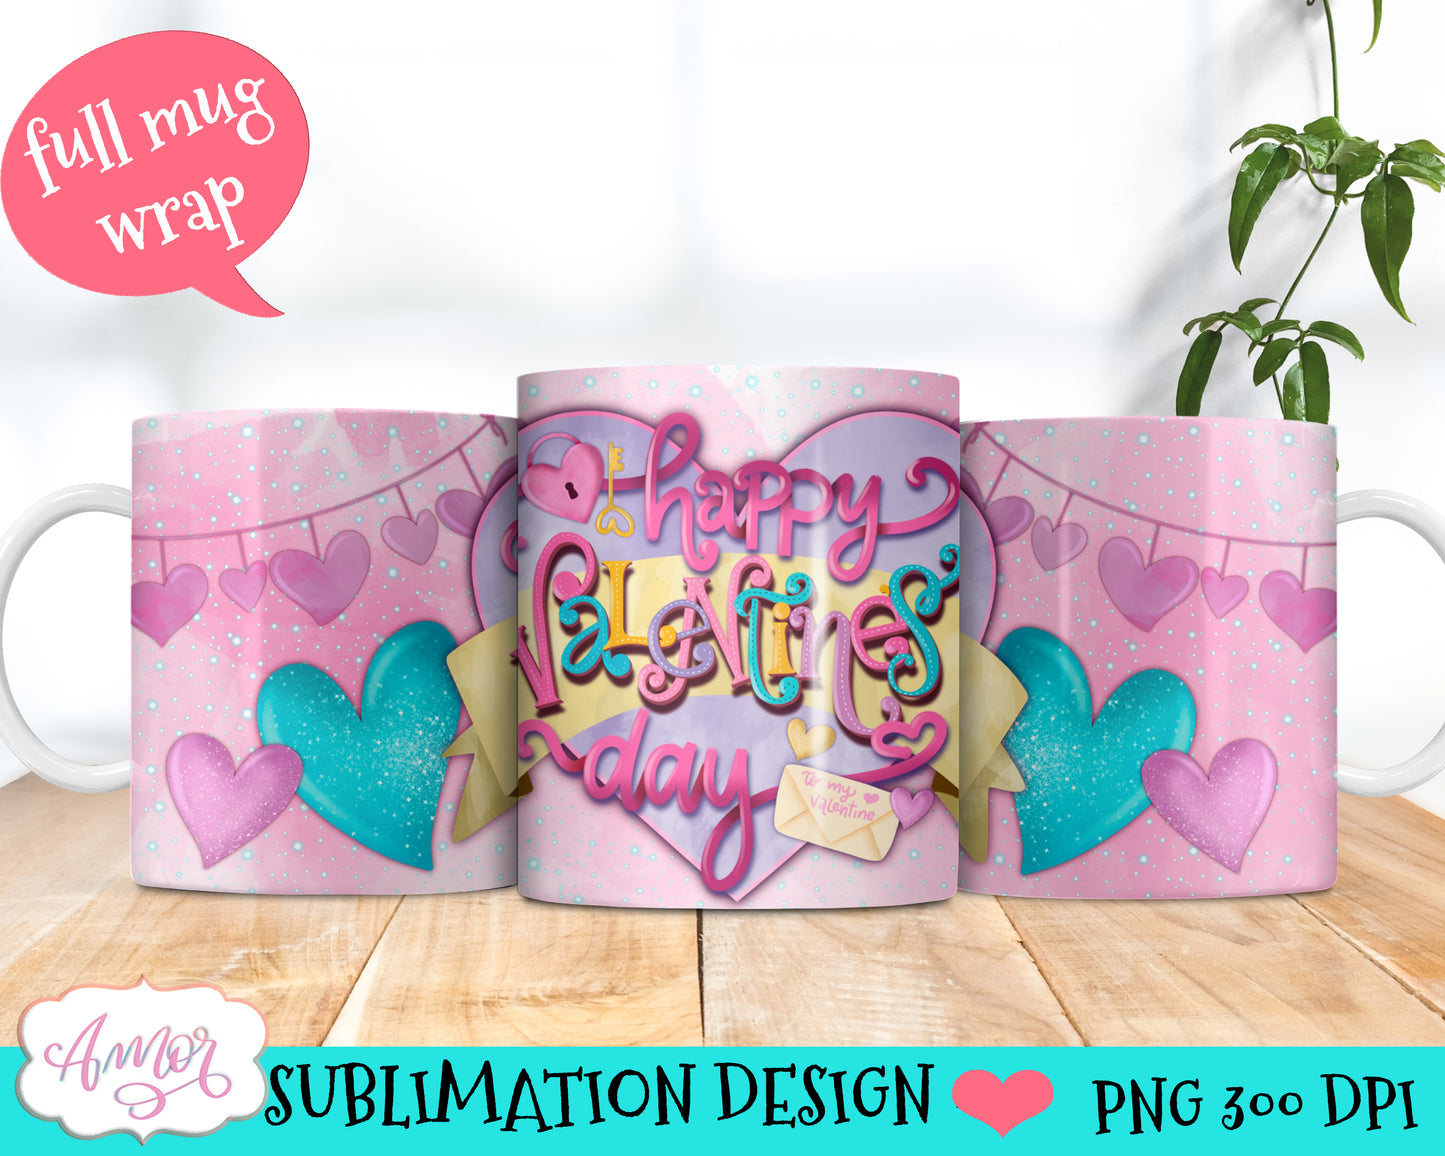 Happy Valentine's day Mug Wrap PNG for Sublimation